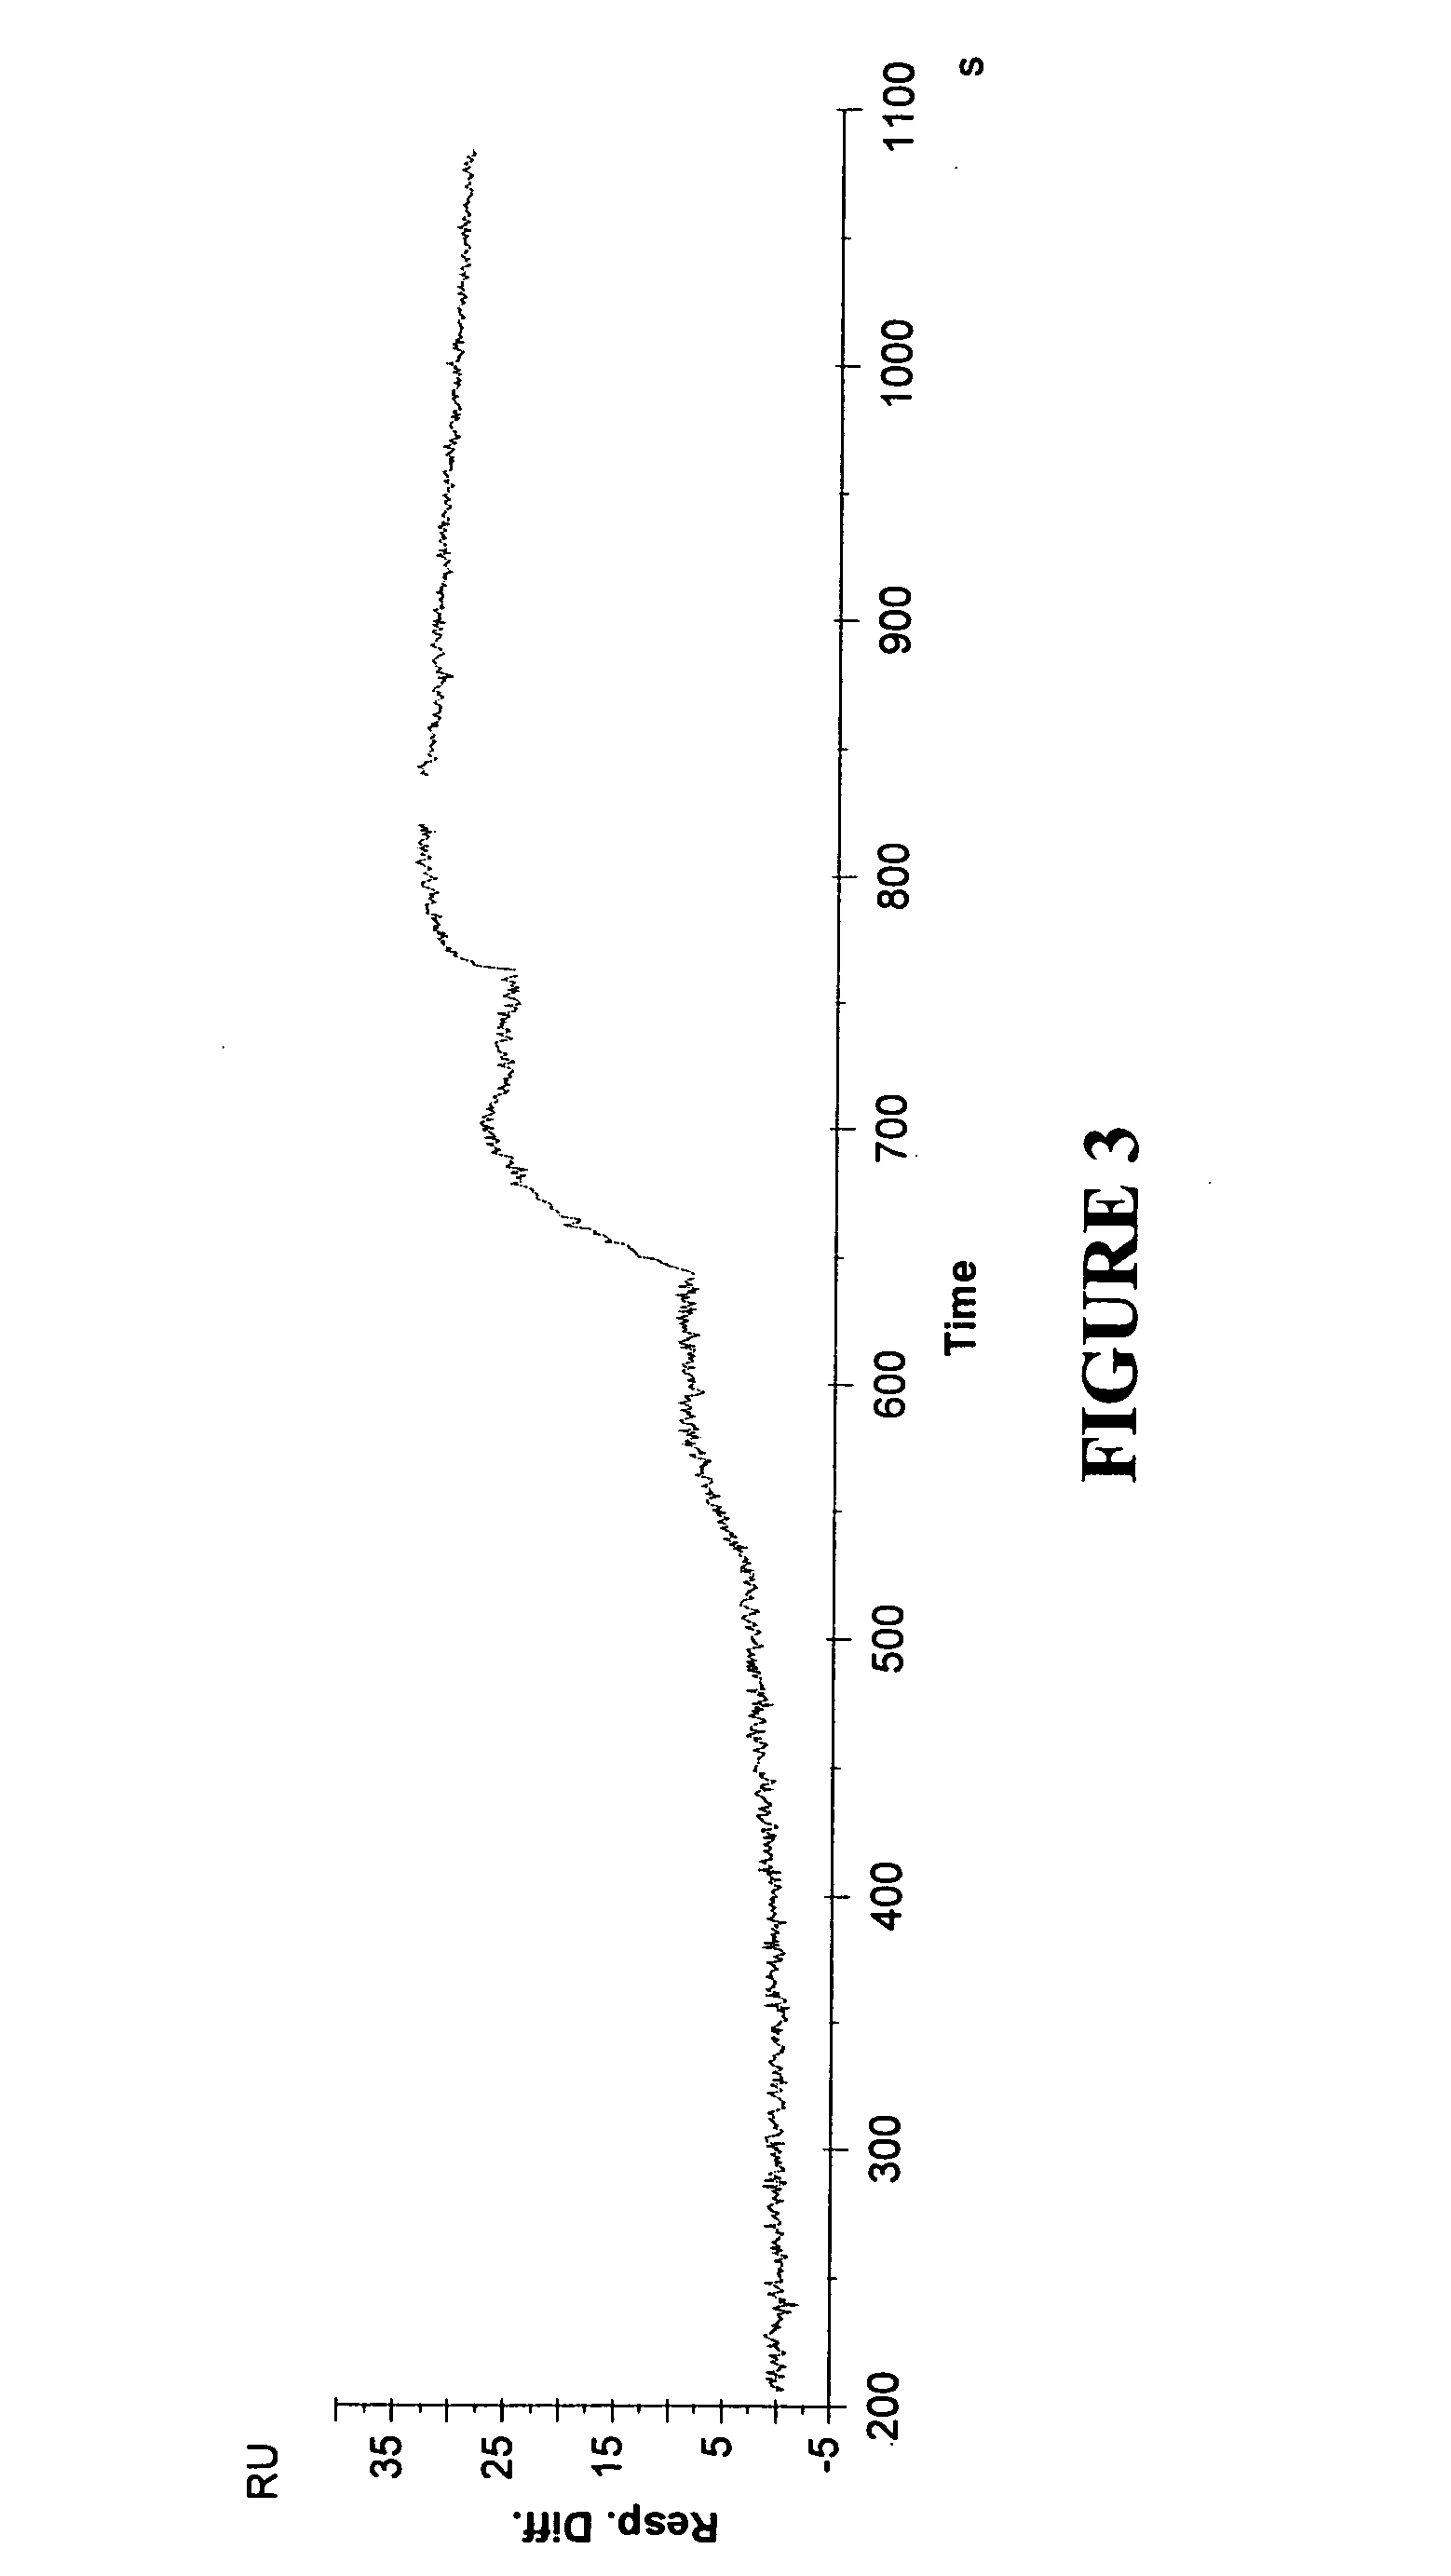 Method and system for determination of molecular interaction parameters